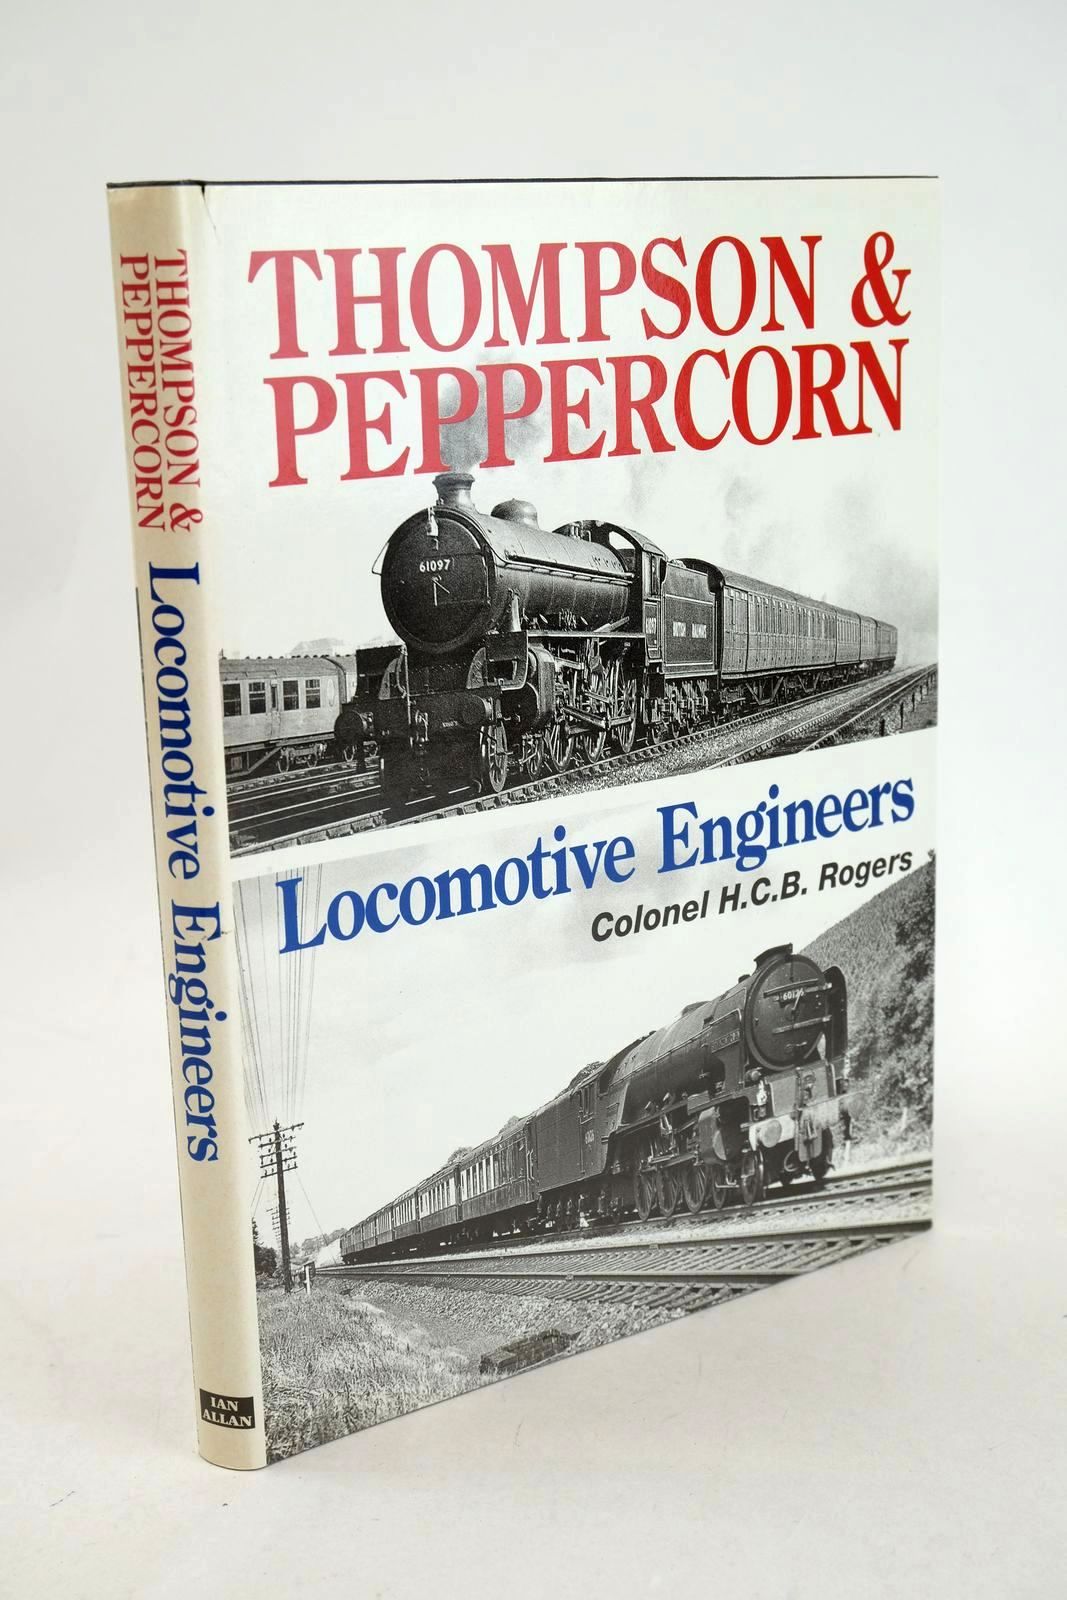 Photo of THOMPSON AND PEPPERCORN LOCOMOTIVE ENGINEERS written by Rogers, H.C.B. published by Ian Allan Ltd. (STOCK CODE: 1327445)  for sale by Stella & Rose's Books